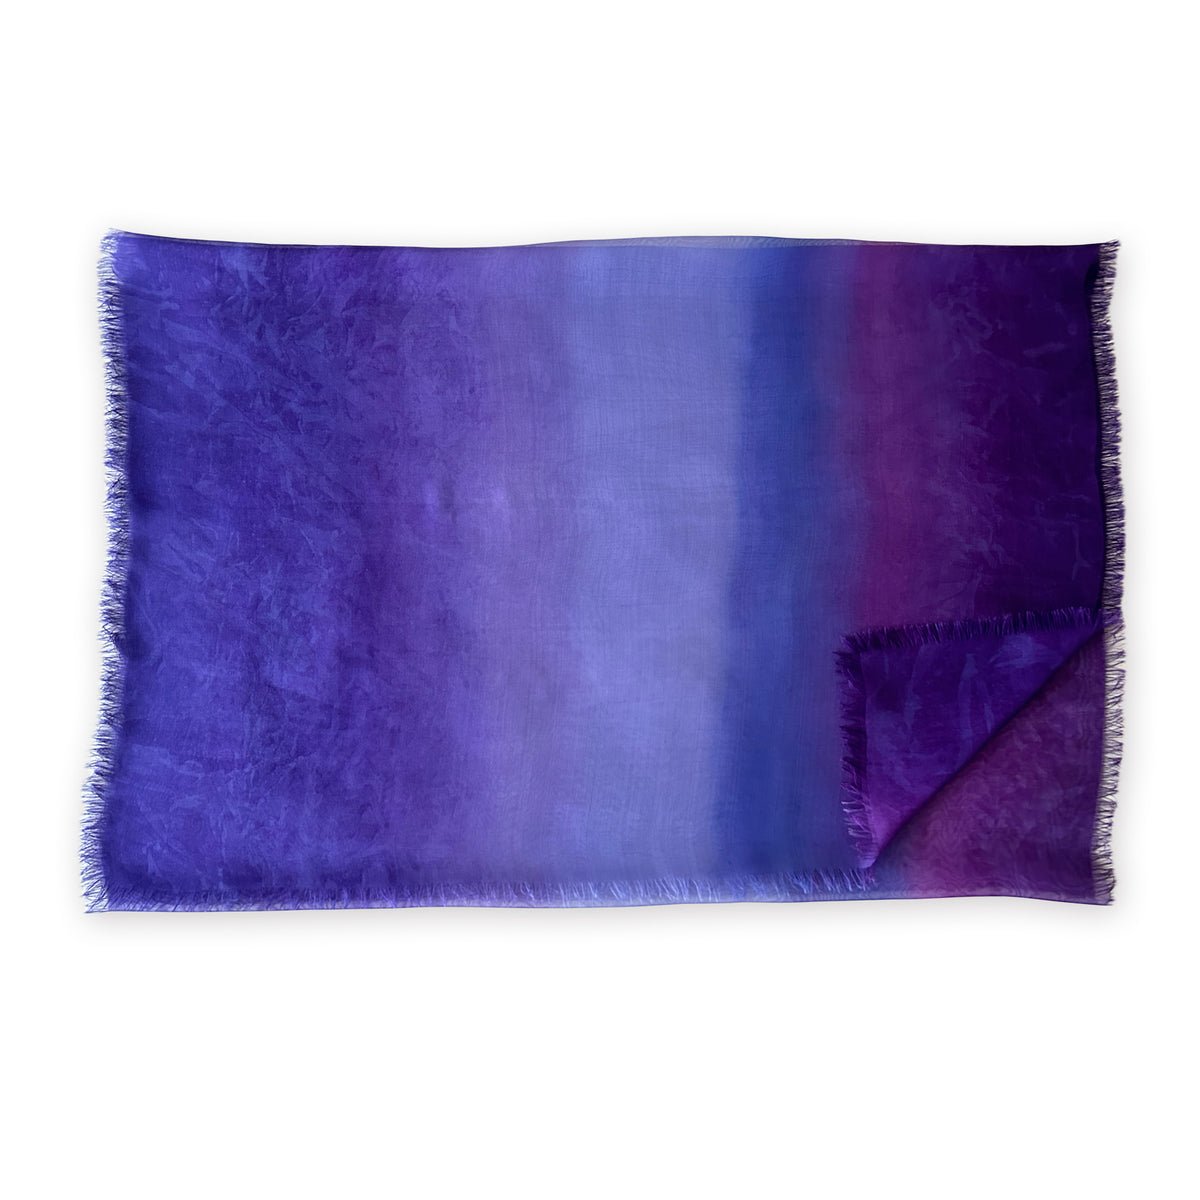 silk-scarf-hand-painted-180x70cm-violet-otta-italy-2342